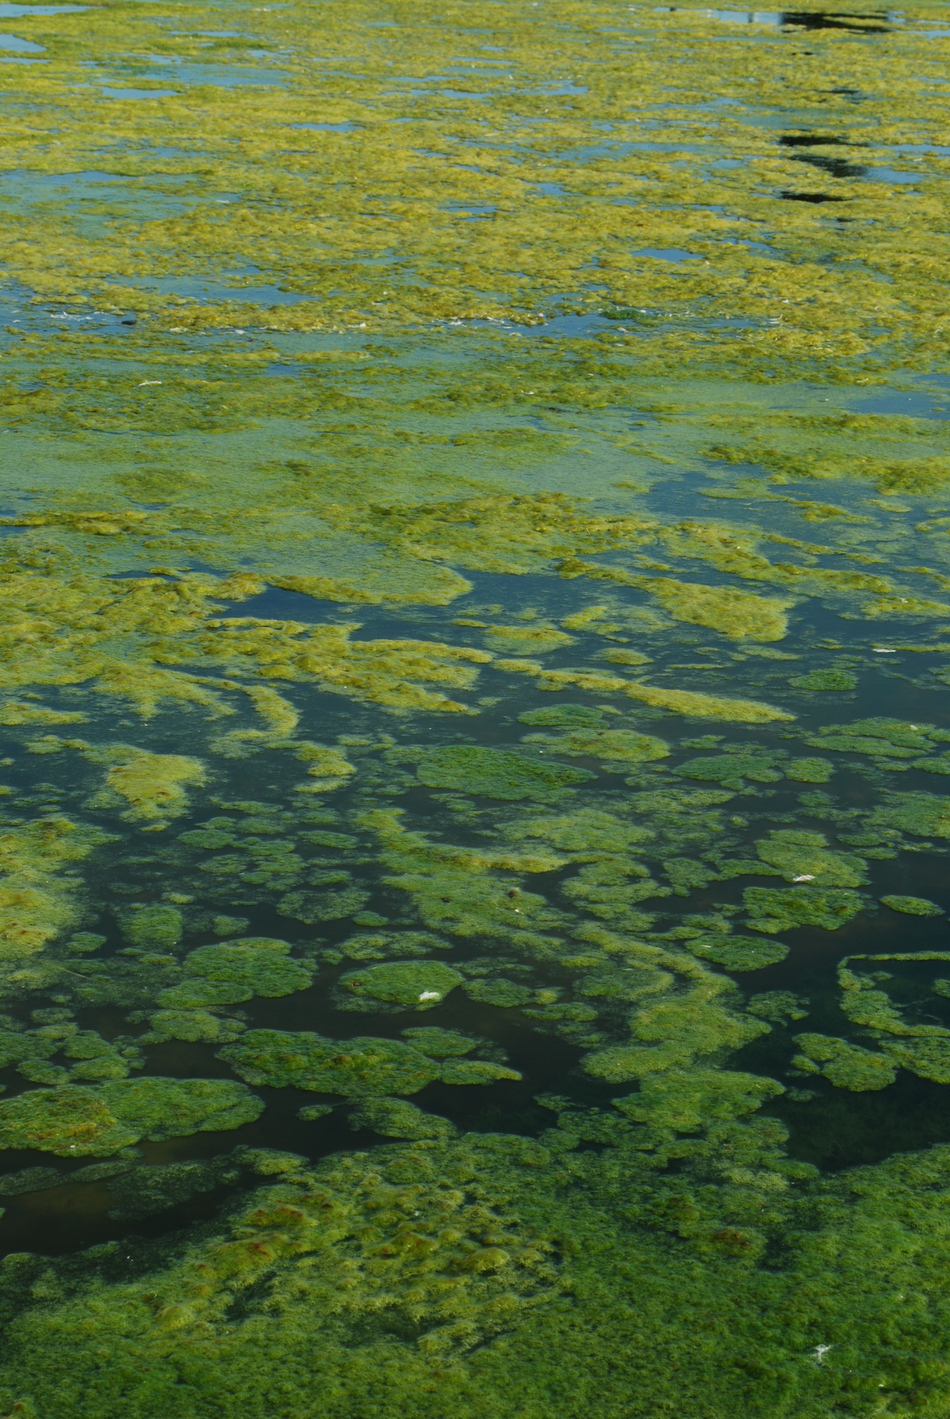 Why You Should Call Poison Control if You’ve Been Exposed to Algae Bloom Water